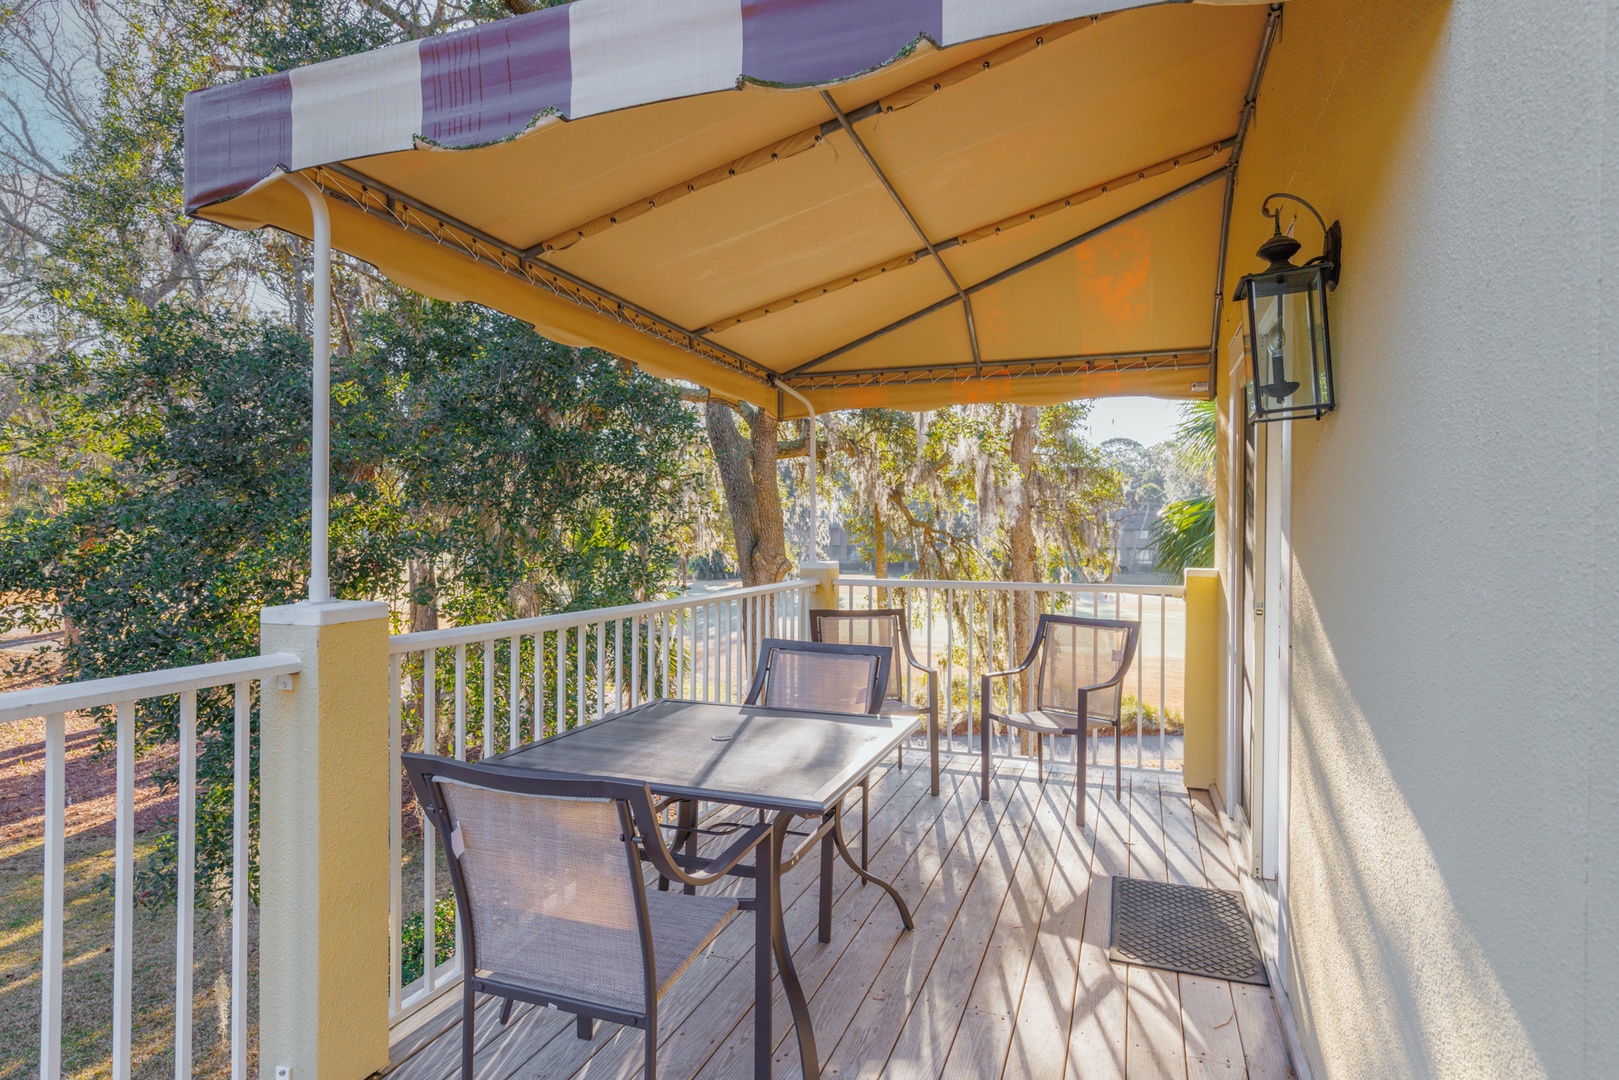 Take in scenic views from the elevated second-floor deck